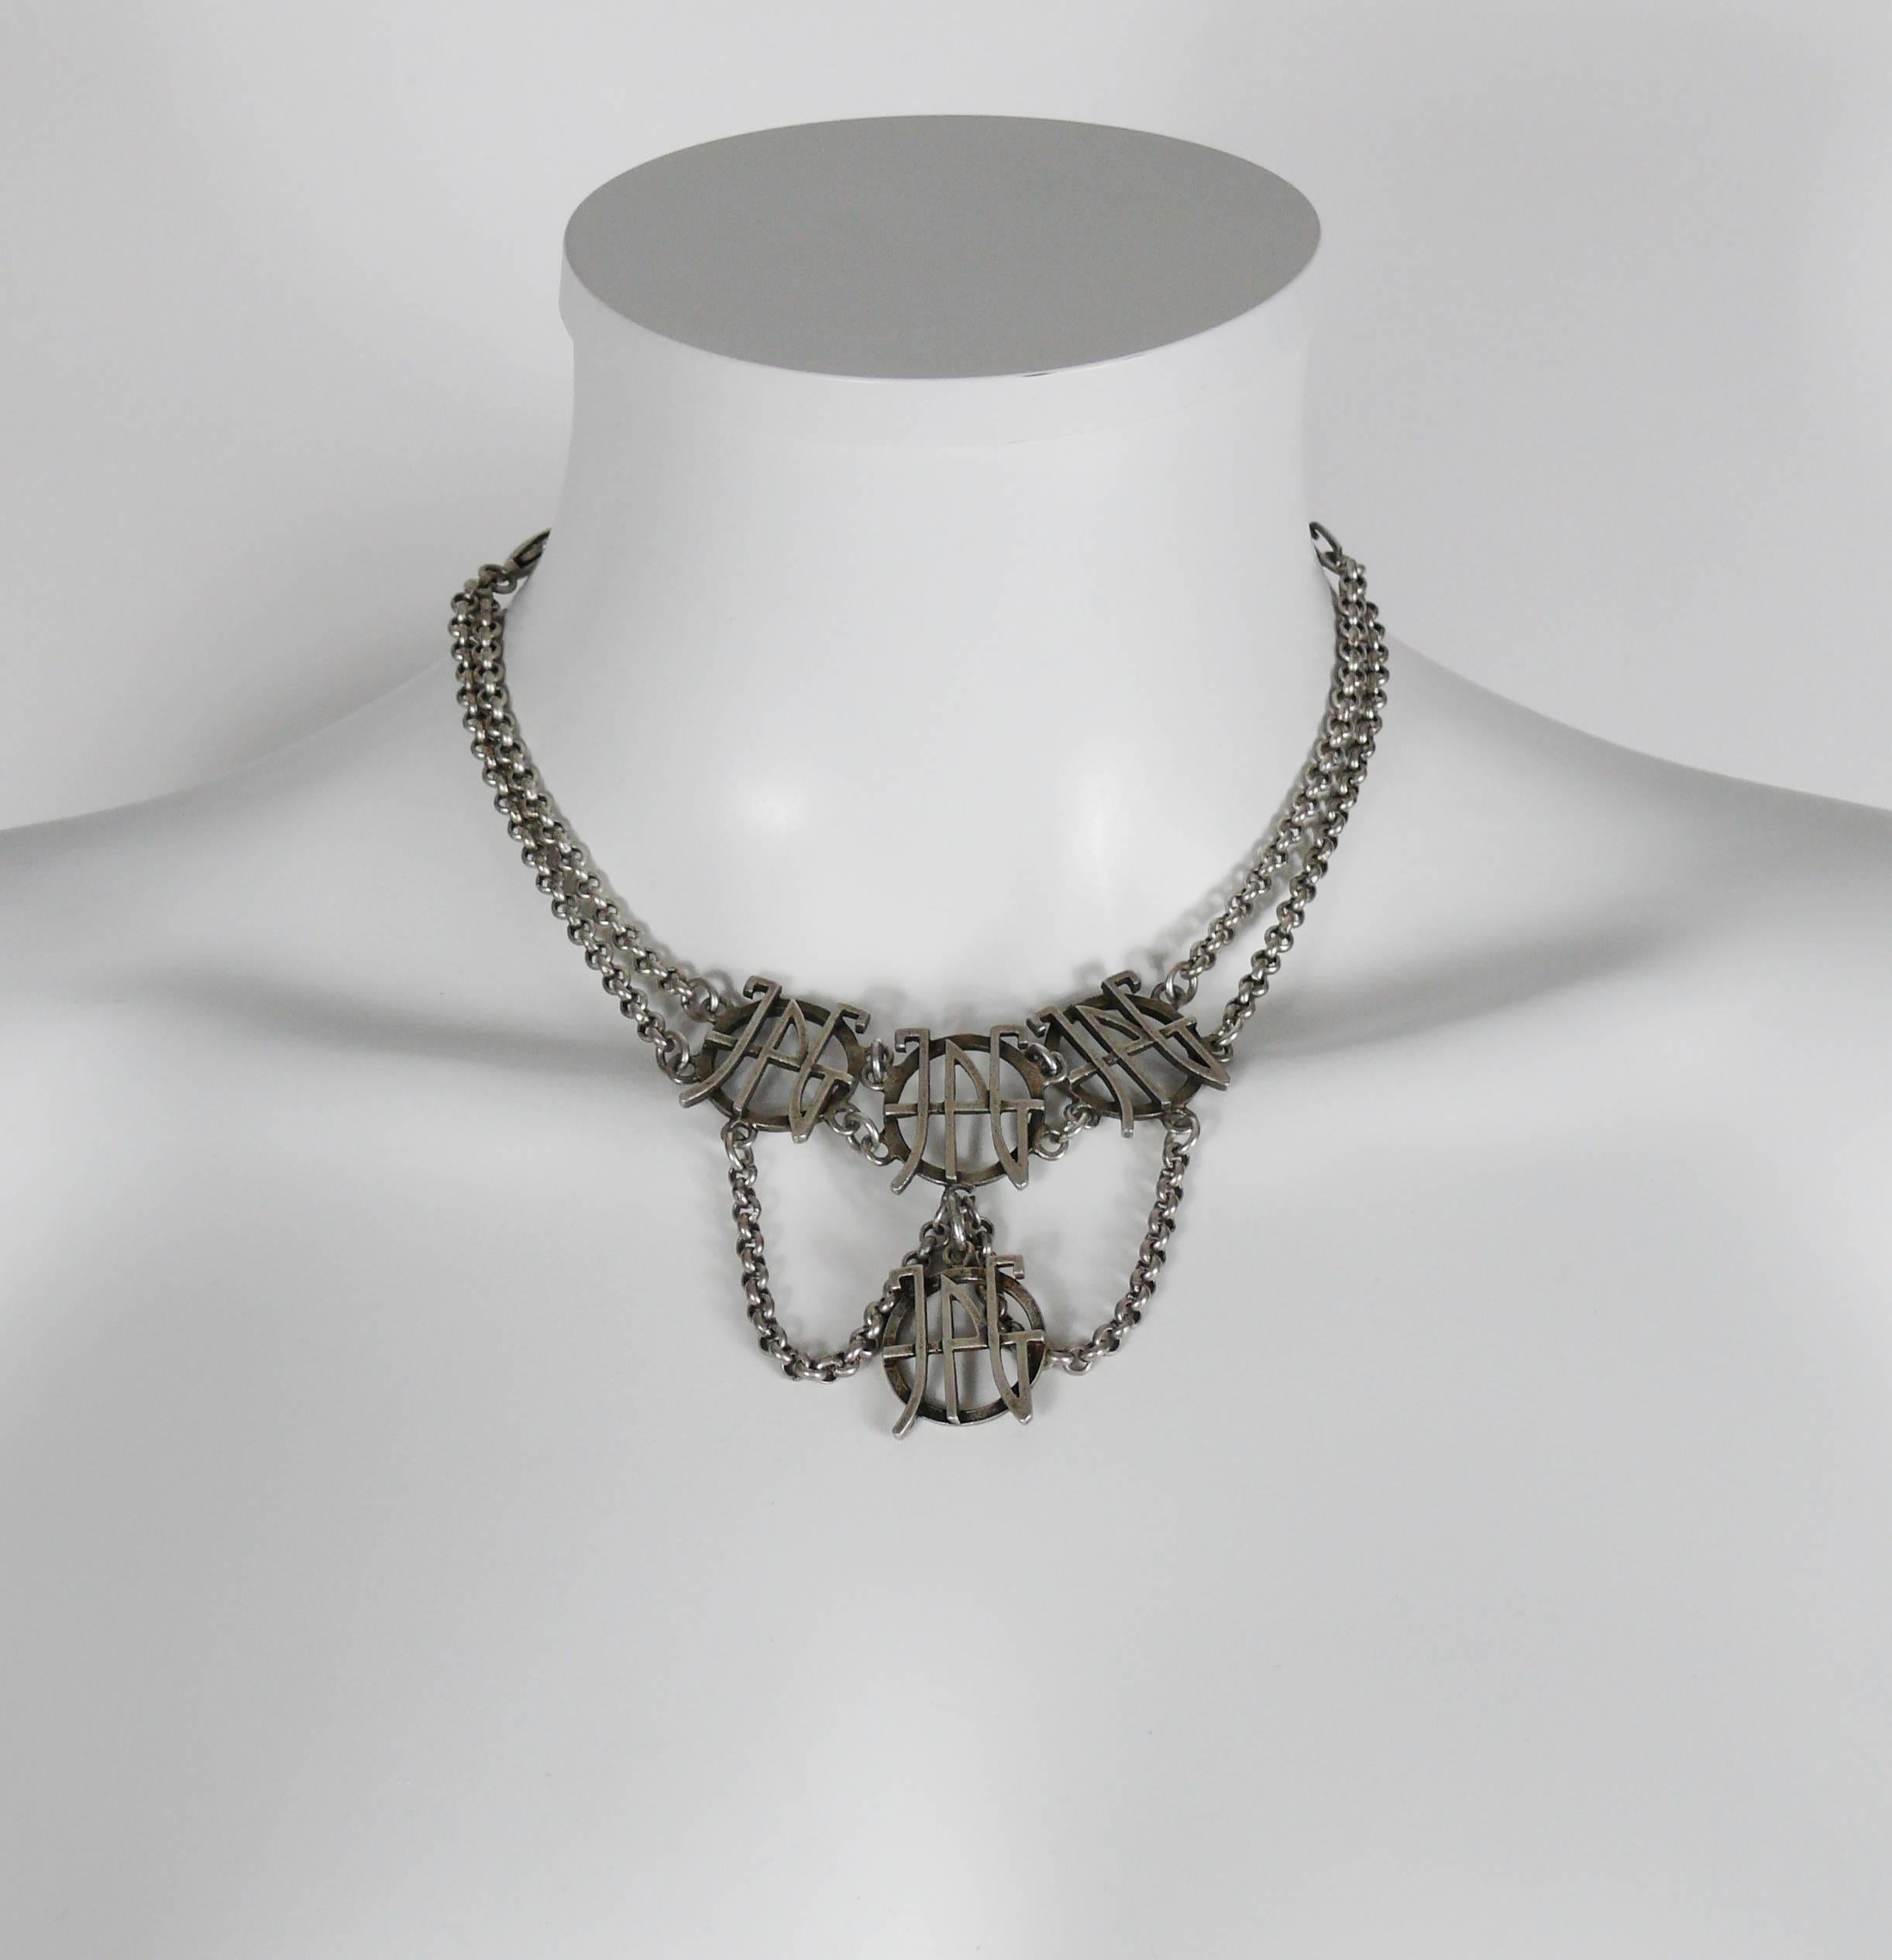 JEAN PAUL GAULTIER vintage antique silver tone chain necklace featuring four JPG logos discs.

Lobster clasp closure.

Indicative measurements : total length approx. 40 cm (15.75 inches) / logo diameter approx 2 cm (0.79 inch).

JEWELRY CONDITION